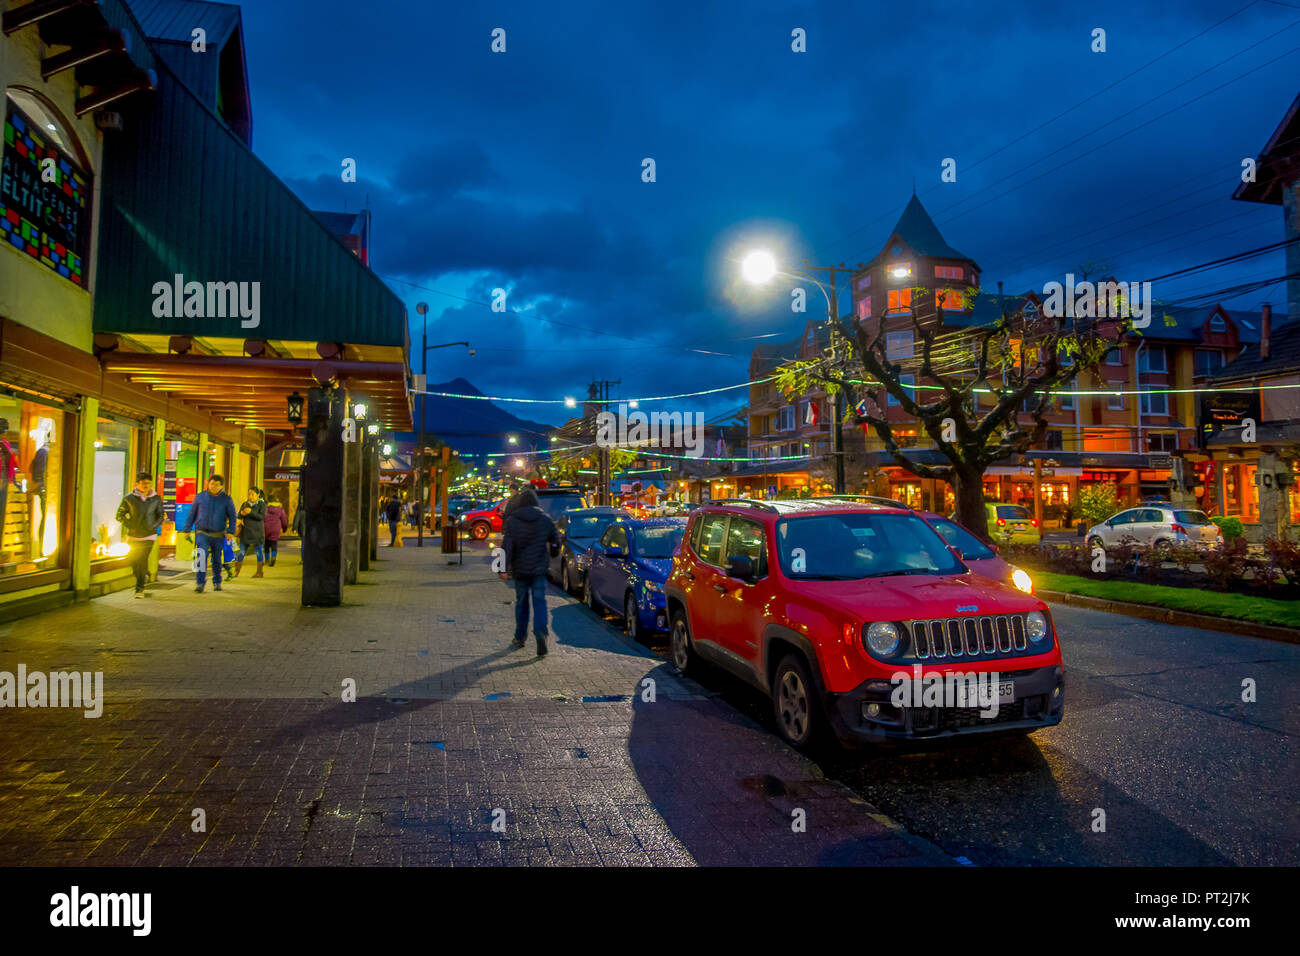 PUCON, CHILE - SEPTEMBER, 23, 2018: Outdoor view of cars parked in a row in the streets of the city in Pucon at night Stock Photo